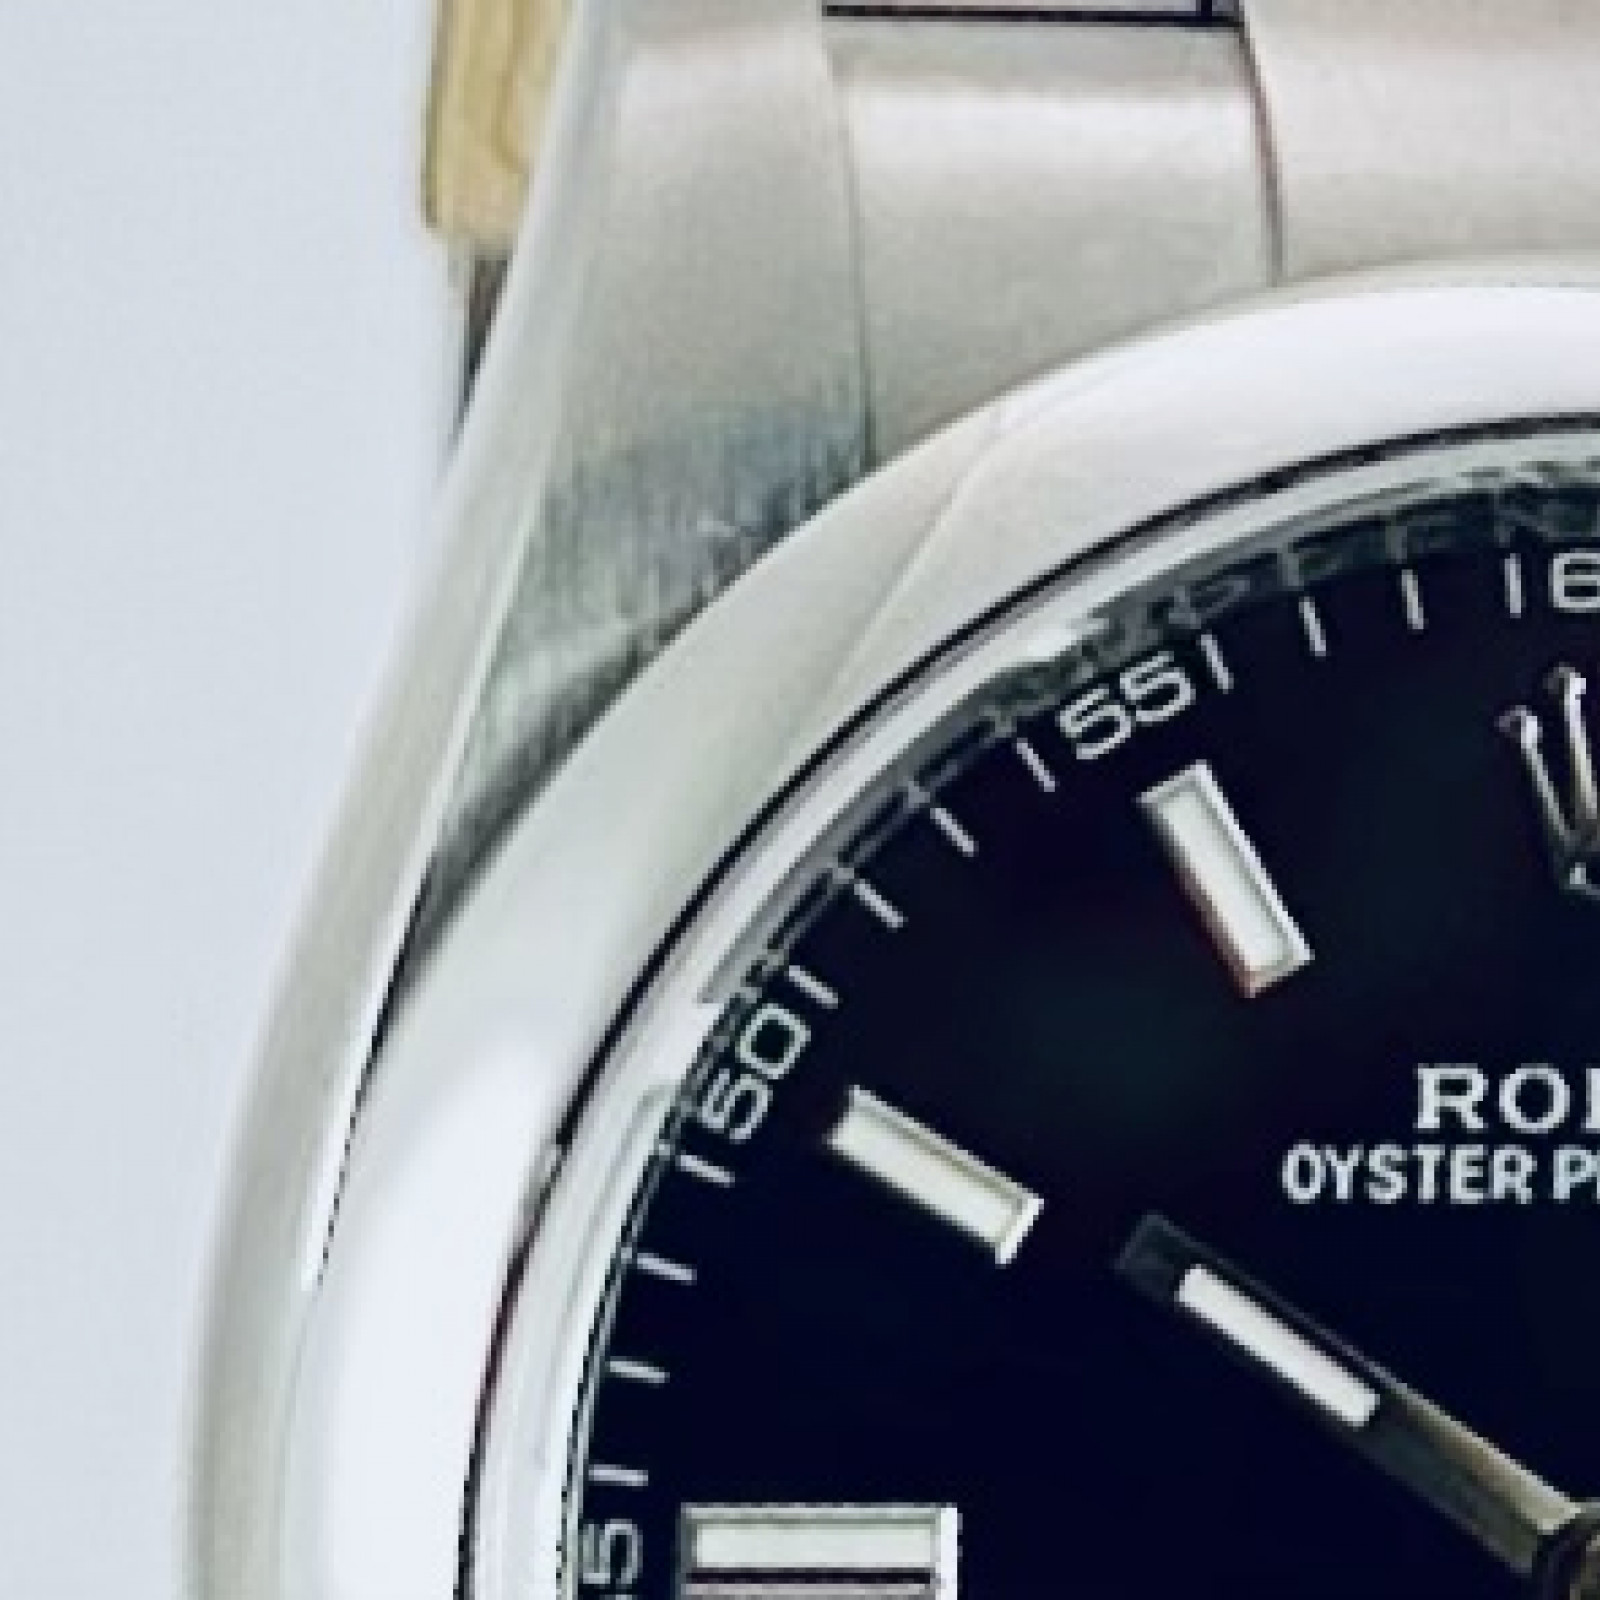 2019 Rolex Oyster Perpetual 116000 Stainless Steel